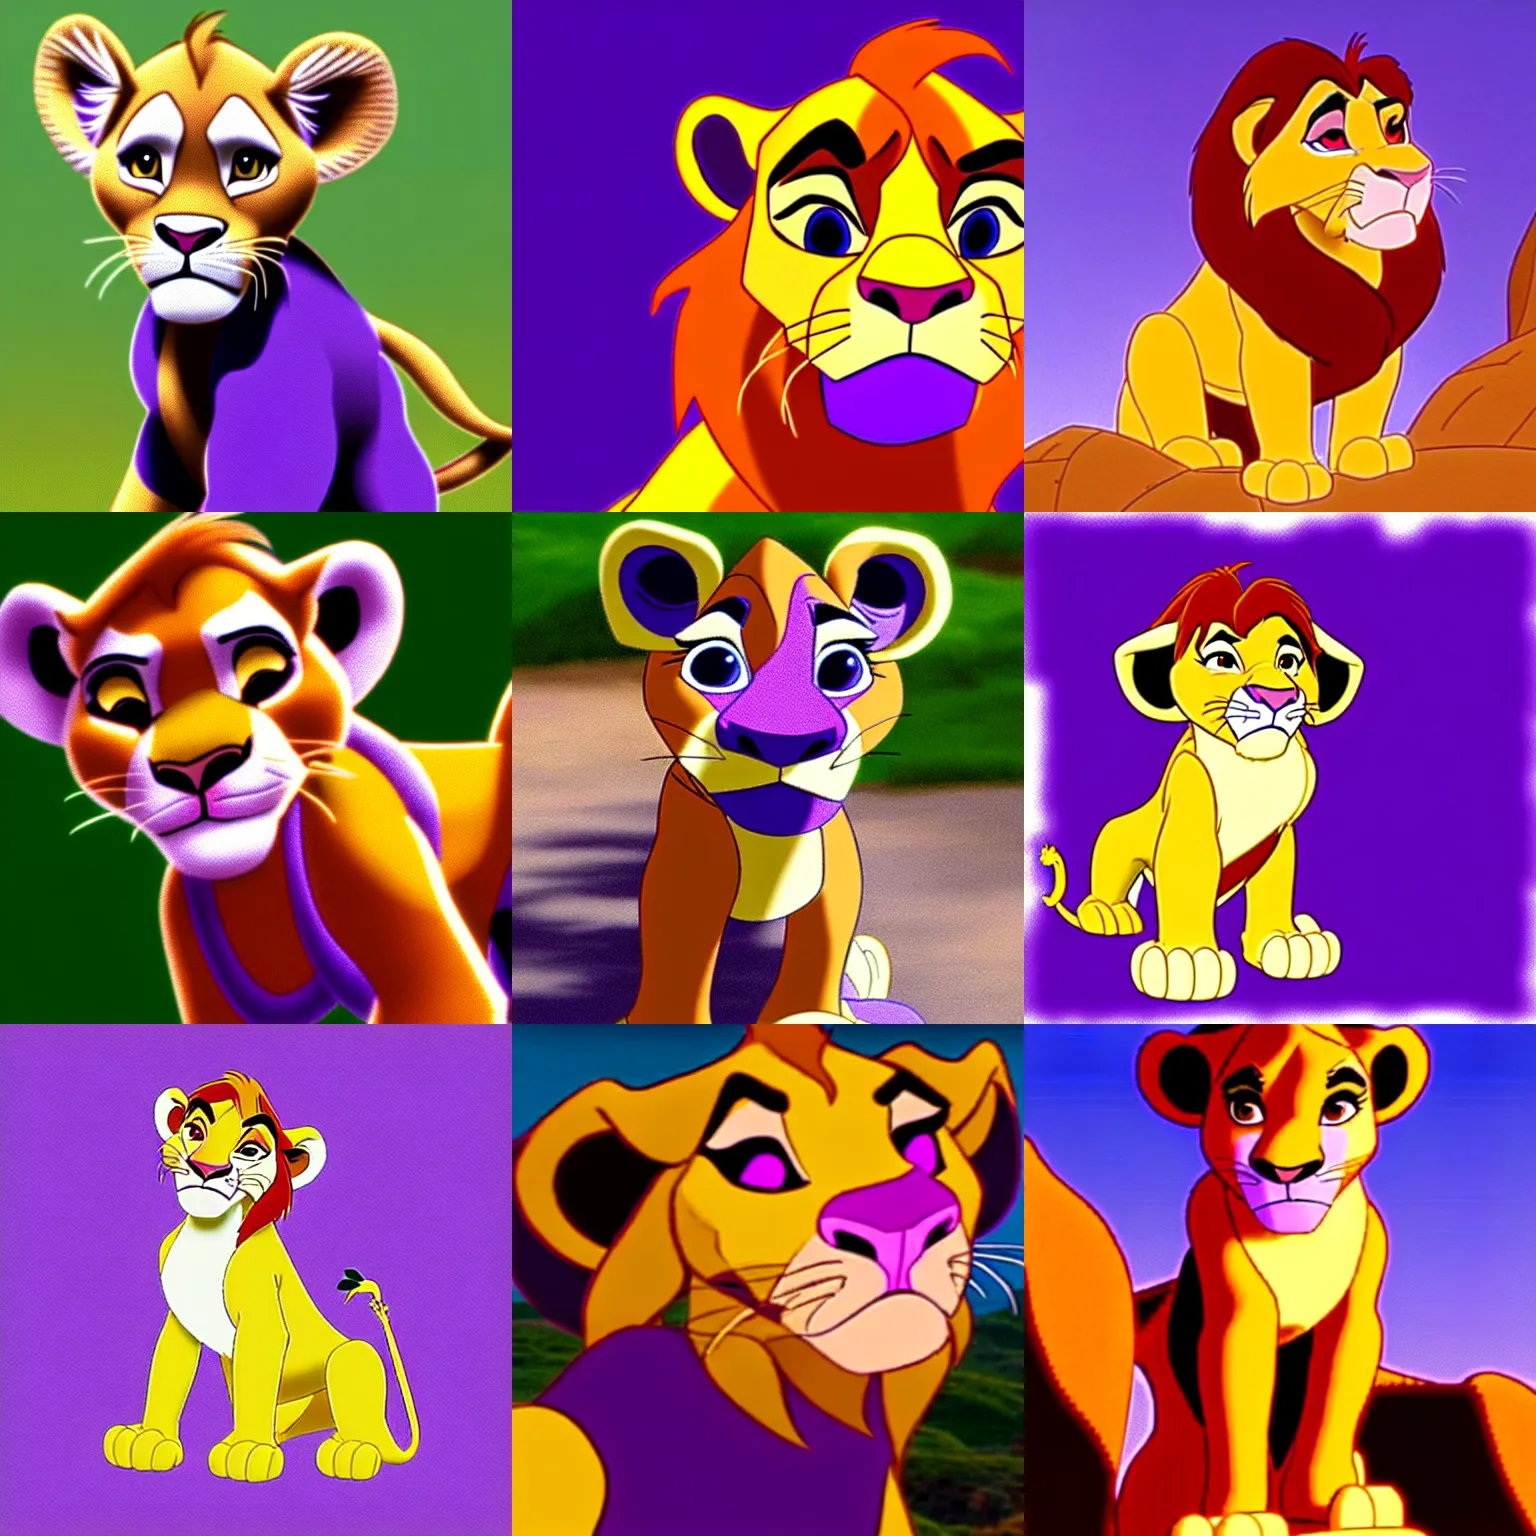 Prompt: Simba (from The Lion King) wearing a purple uniform